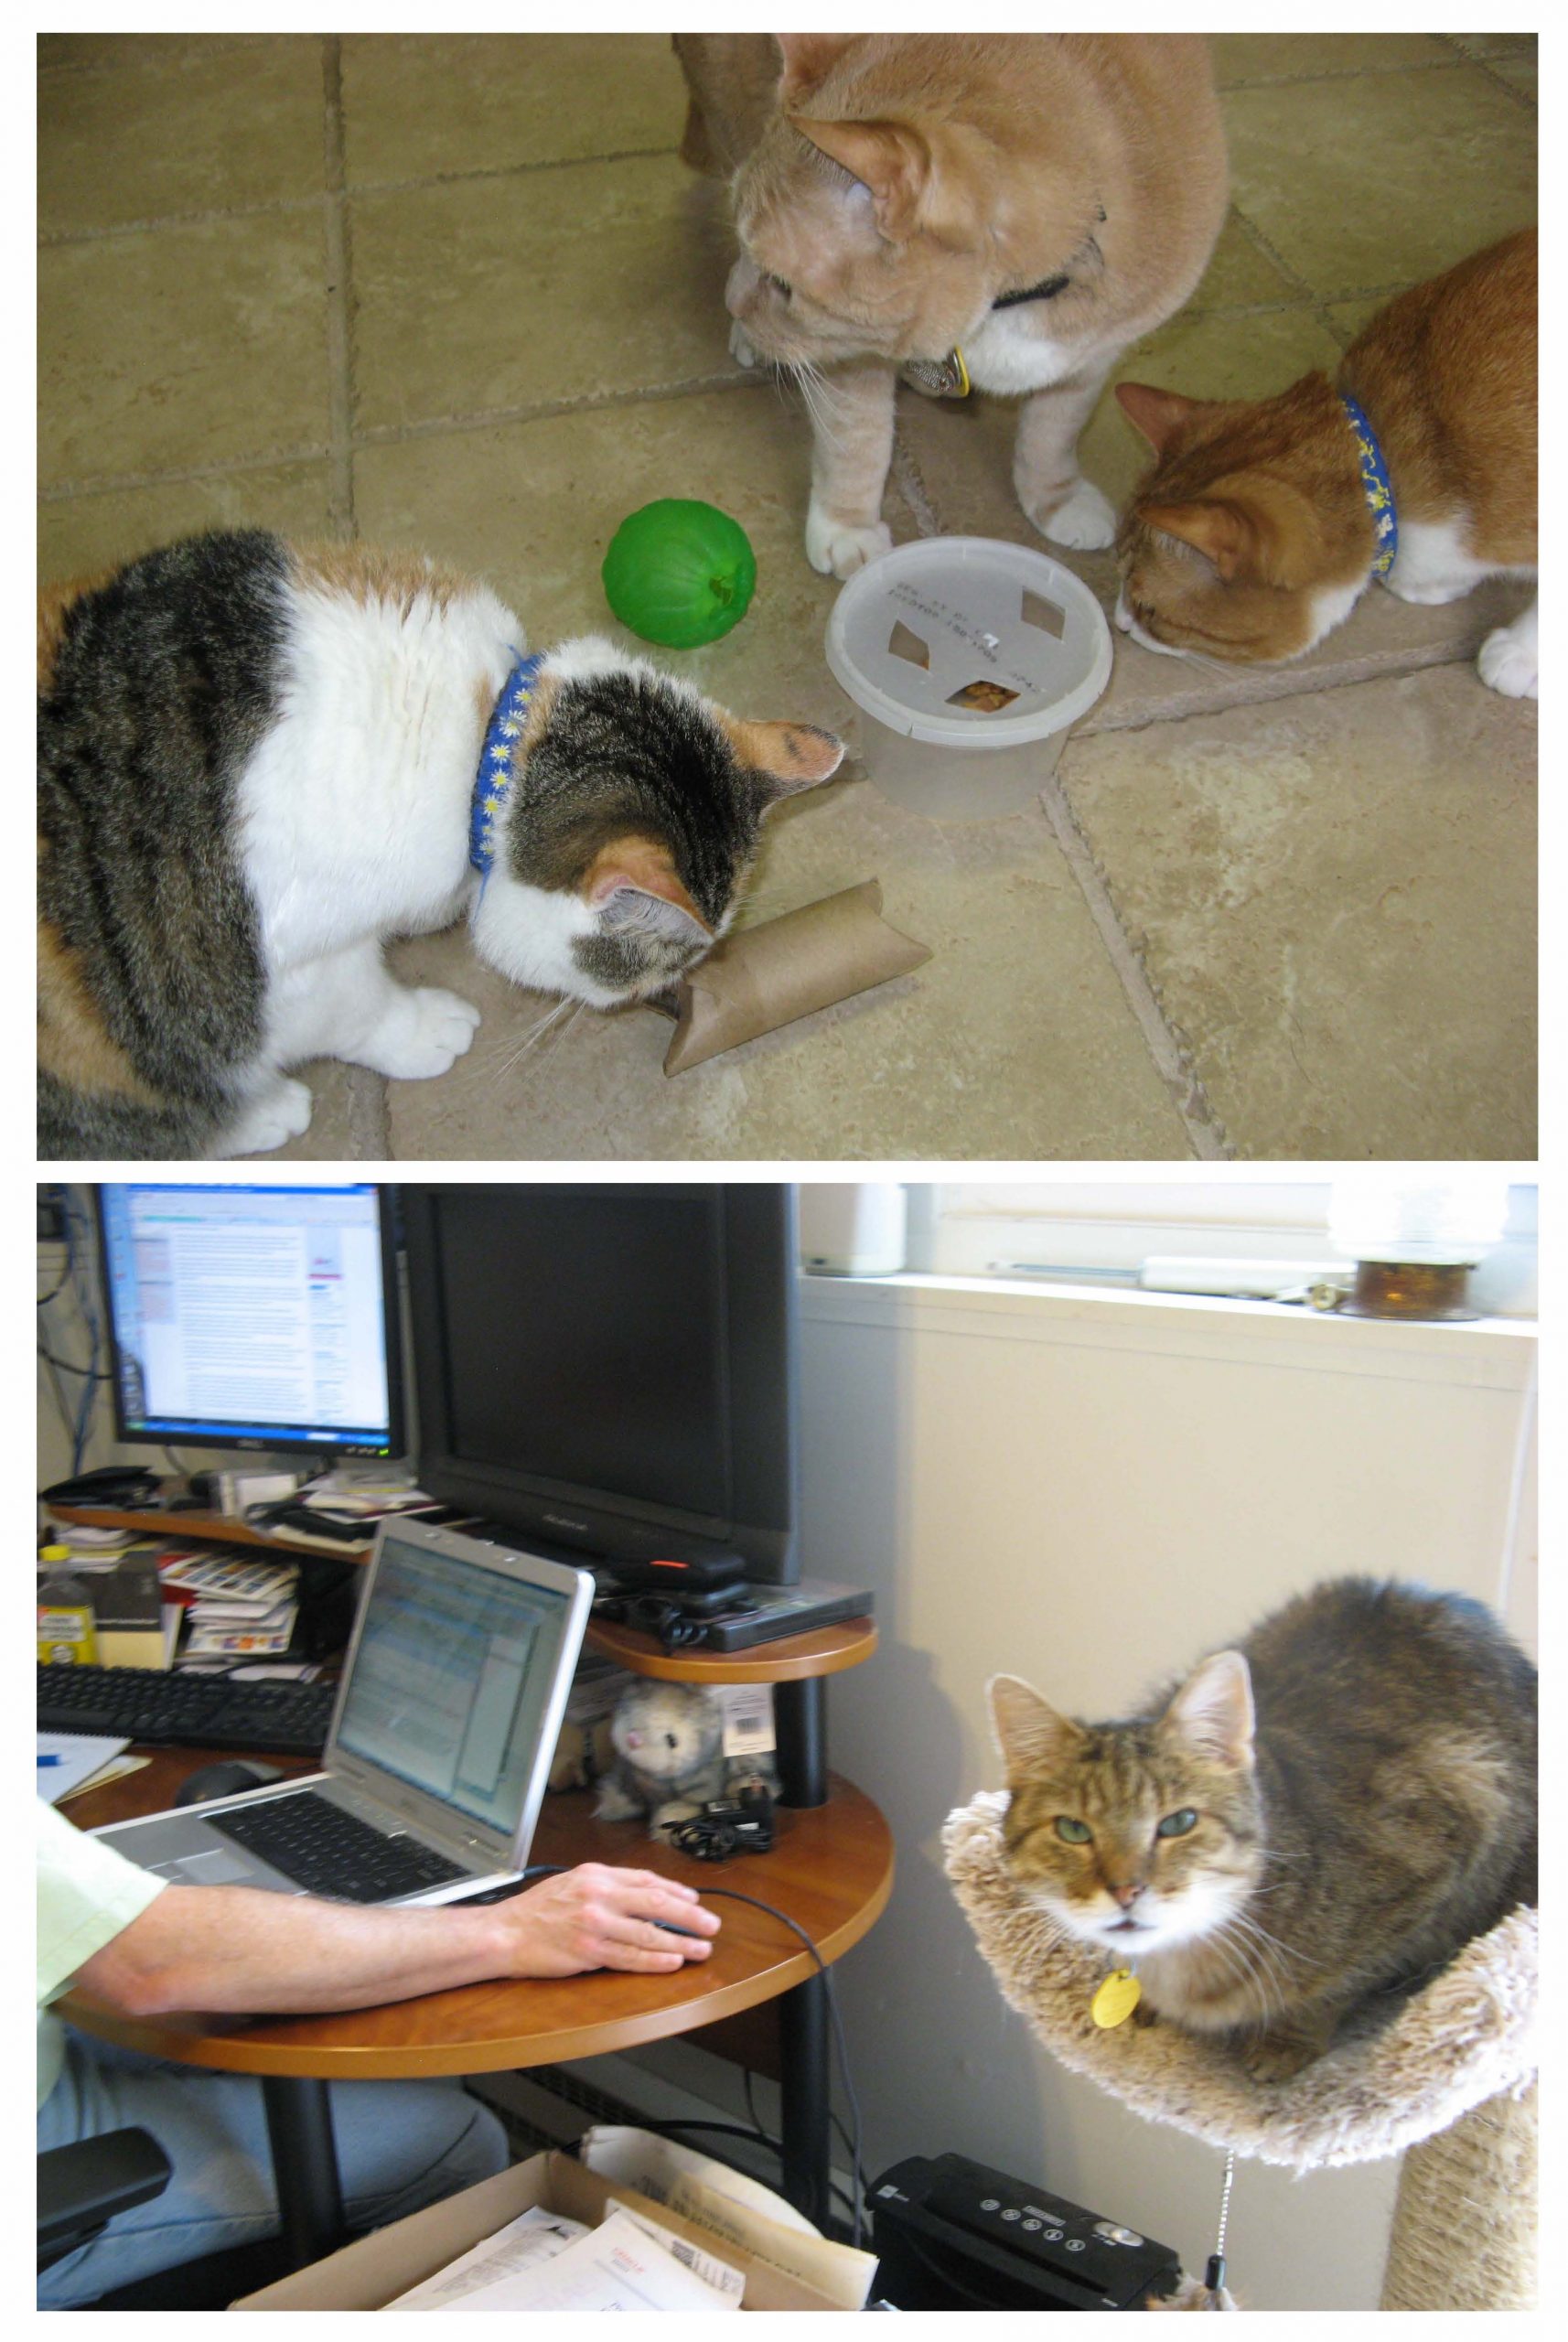 (Left) three cats investigate various feeder toys on the floor including a purpose designed ball, cardboard tube, and plastic container with holes cut in it; (Right)a cat perches on a carpeted cat tree beside a man working at his desk